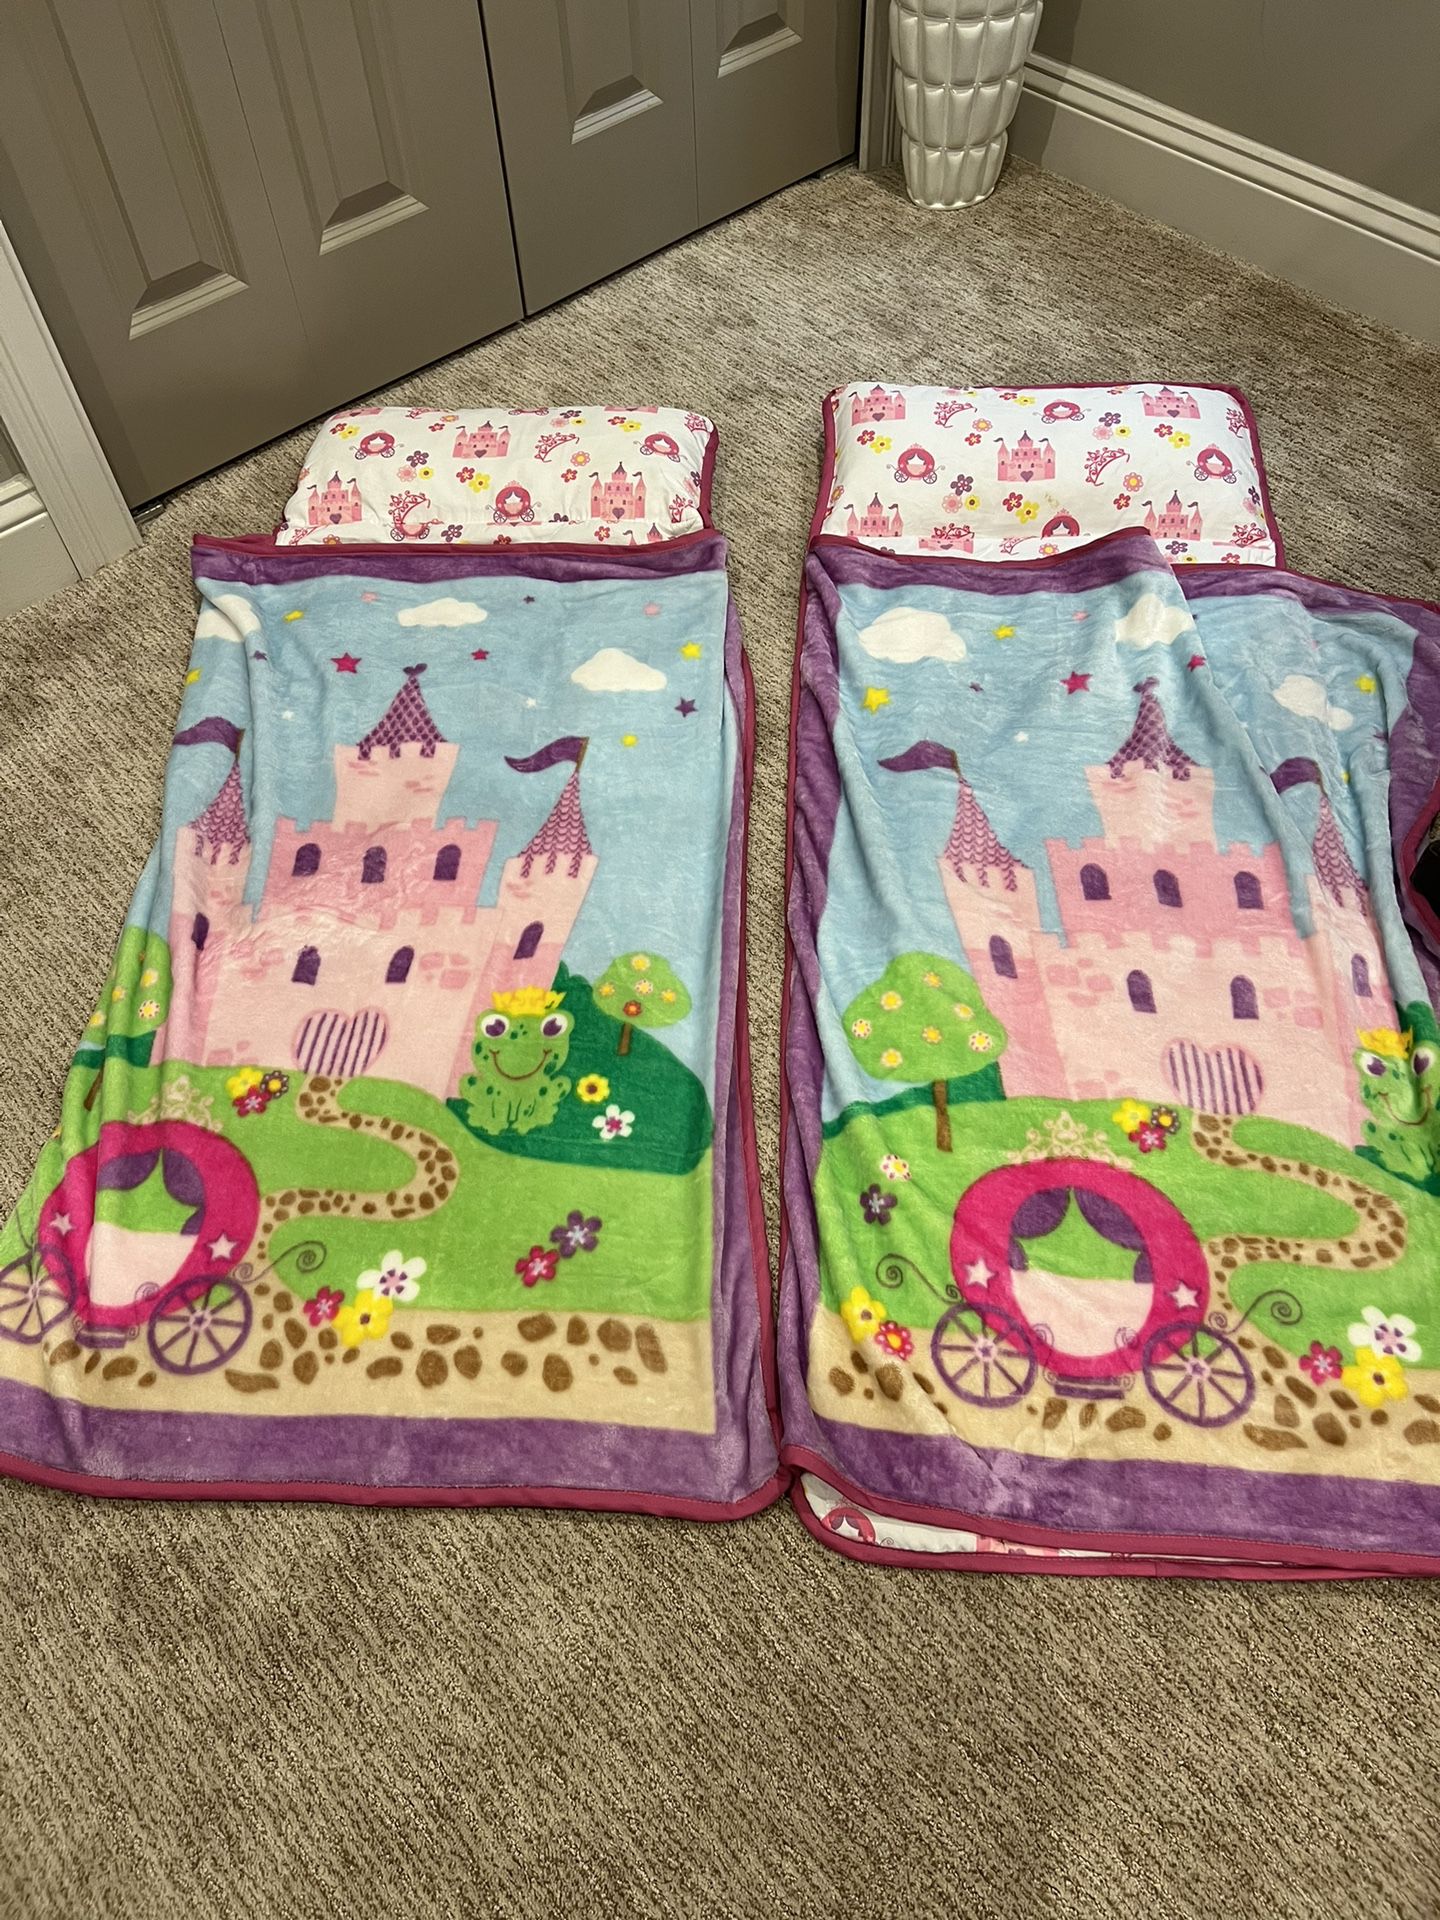 2 Princess Nap Mats W/ Pillows  And 2 Little People Doll Houses 